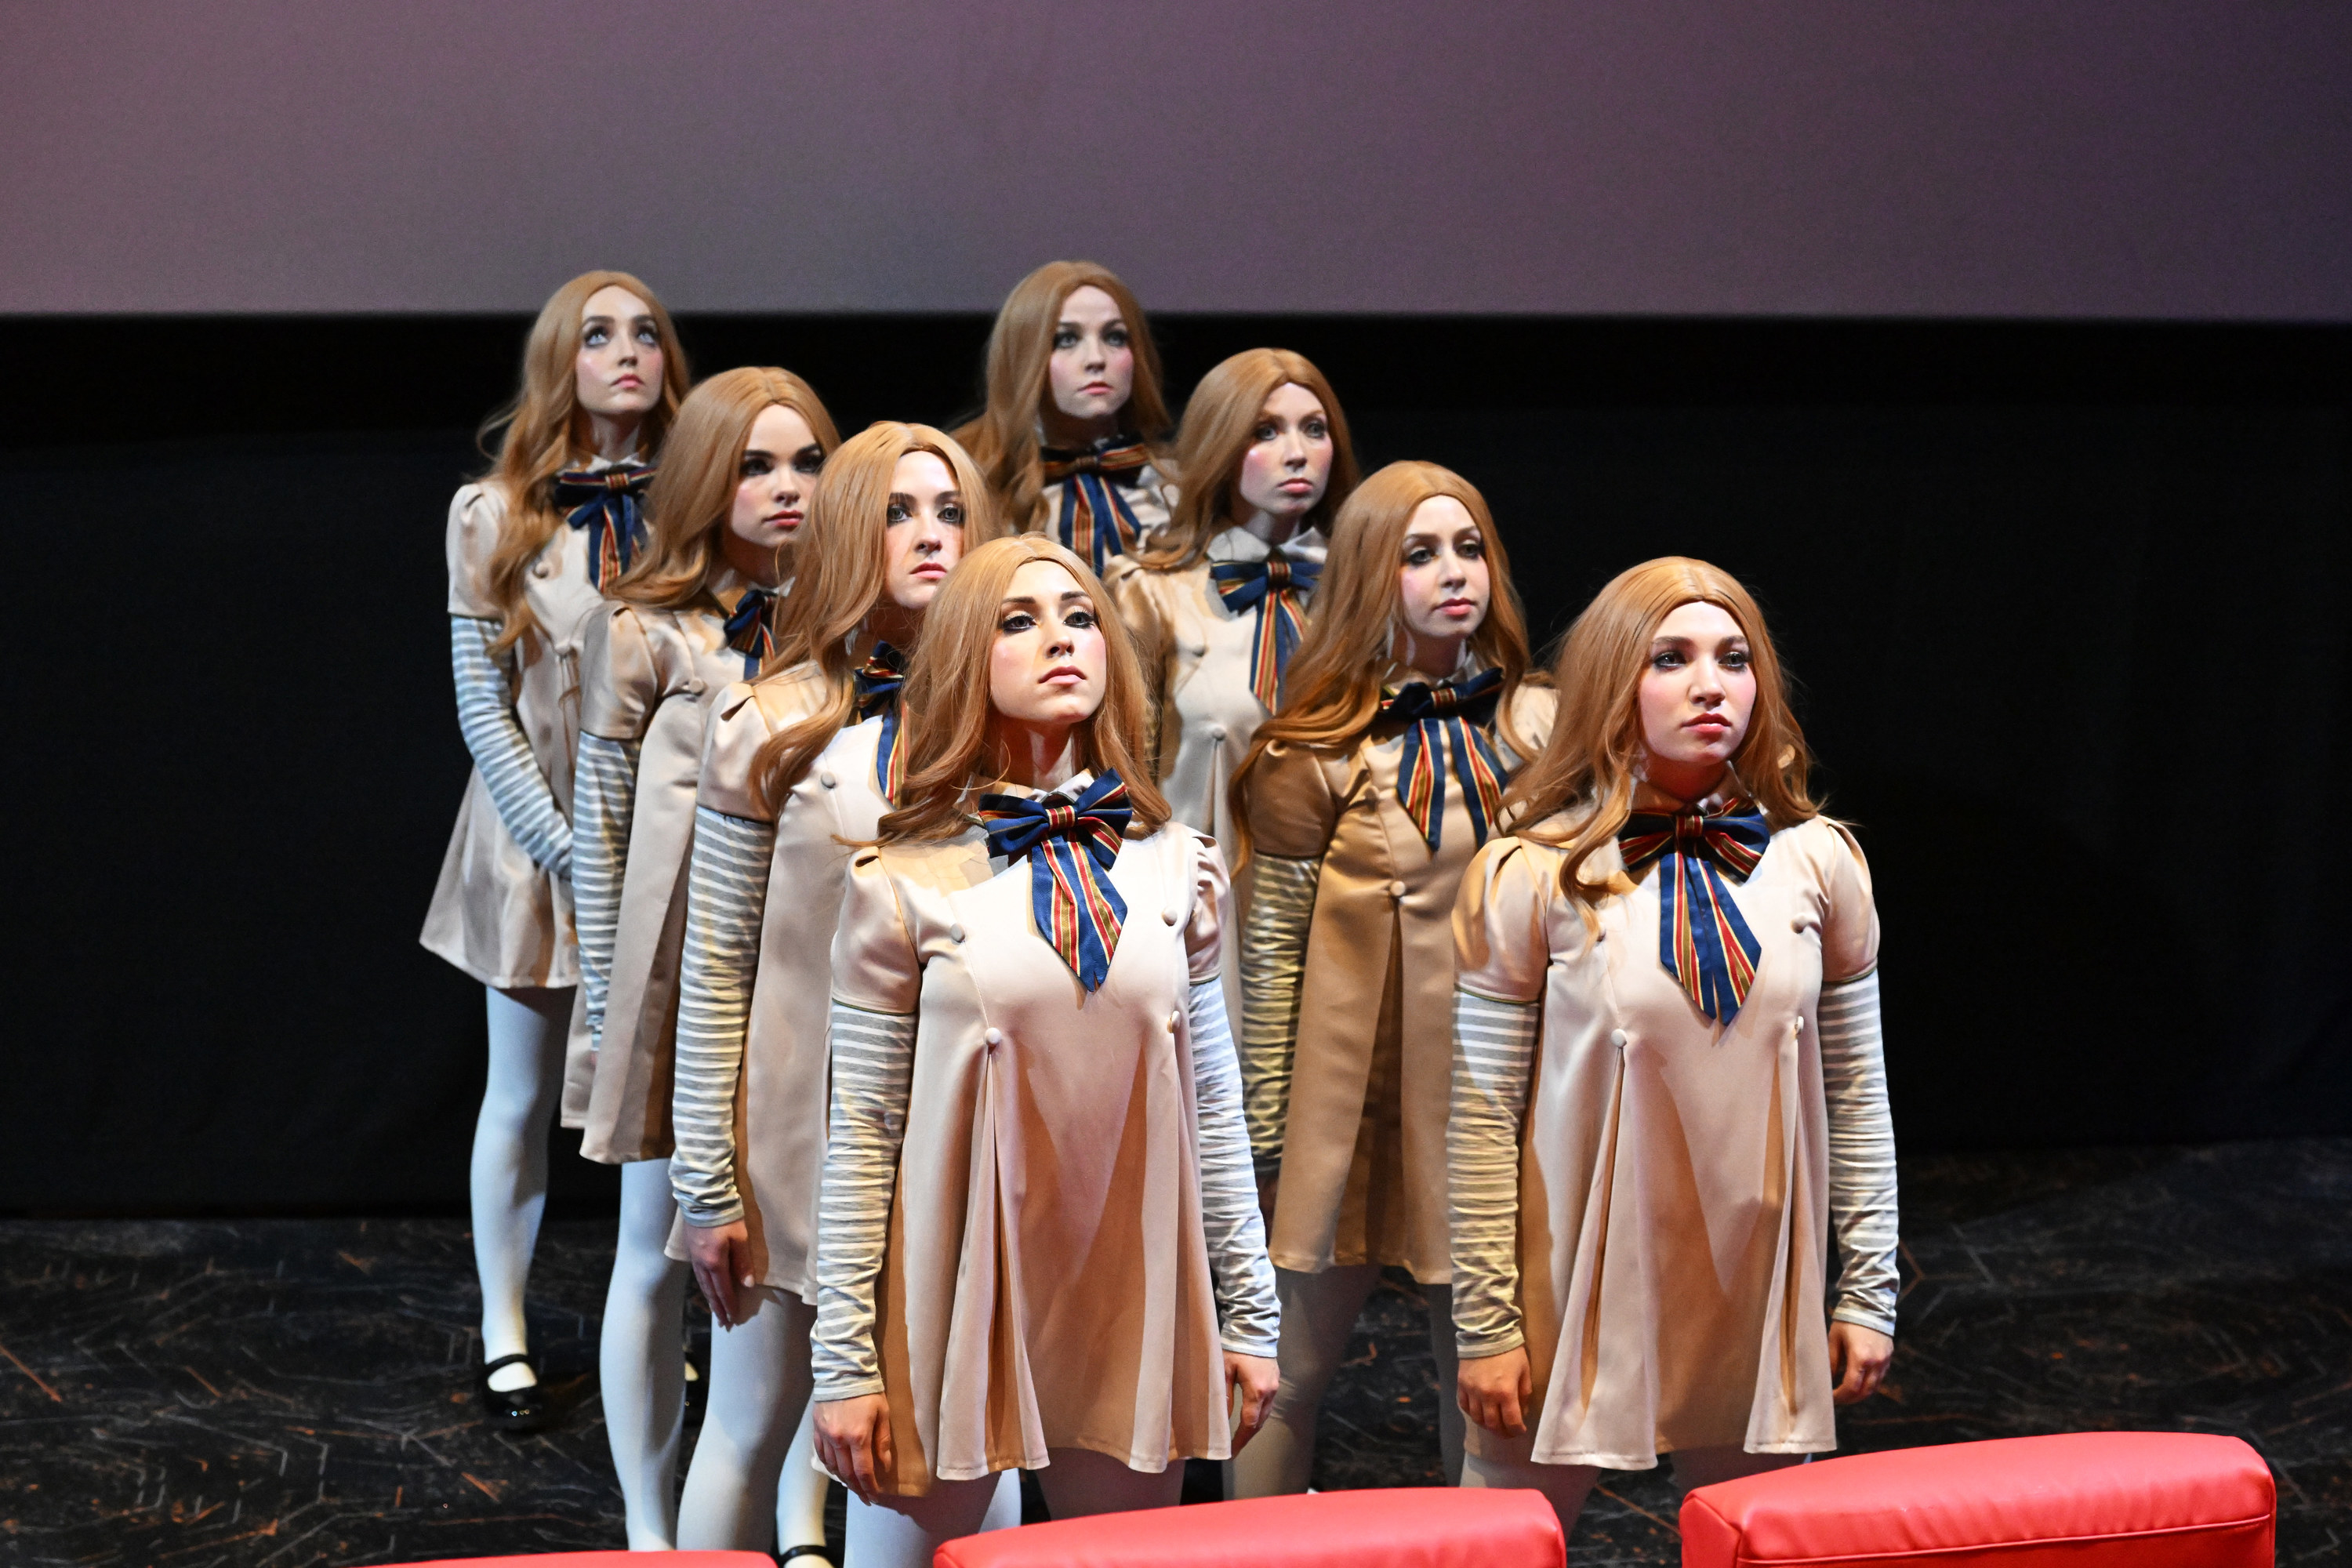 An image showing 8 people dressed as M3GAN dolls